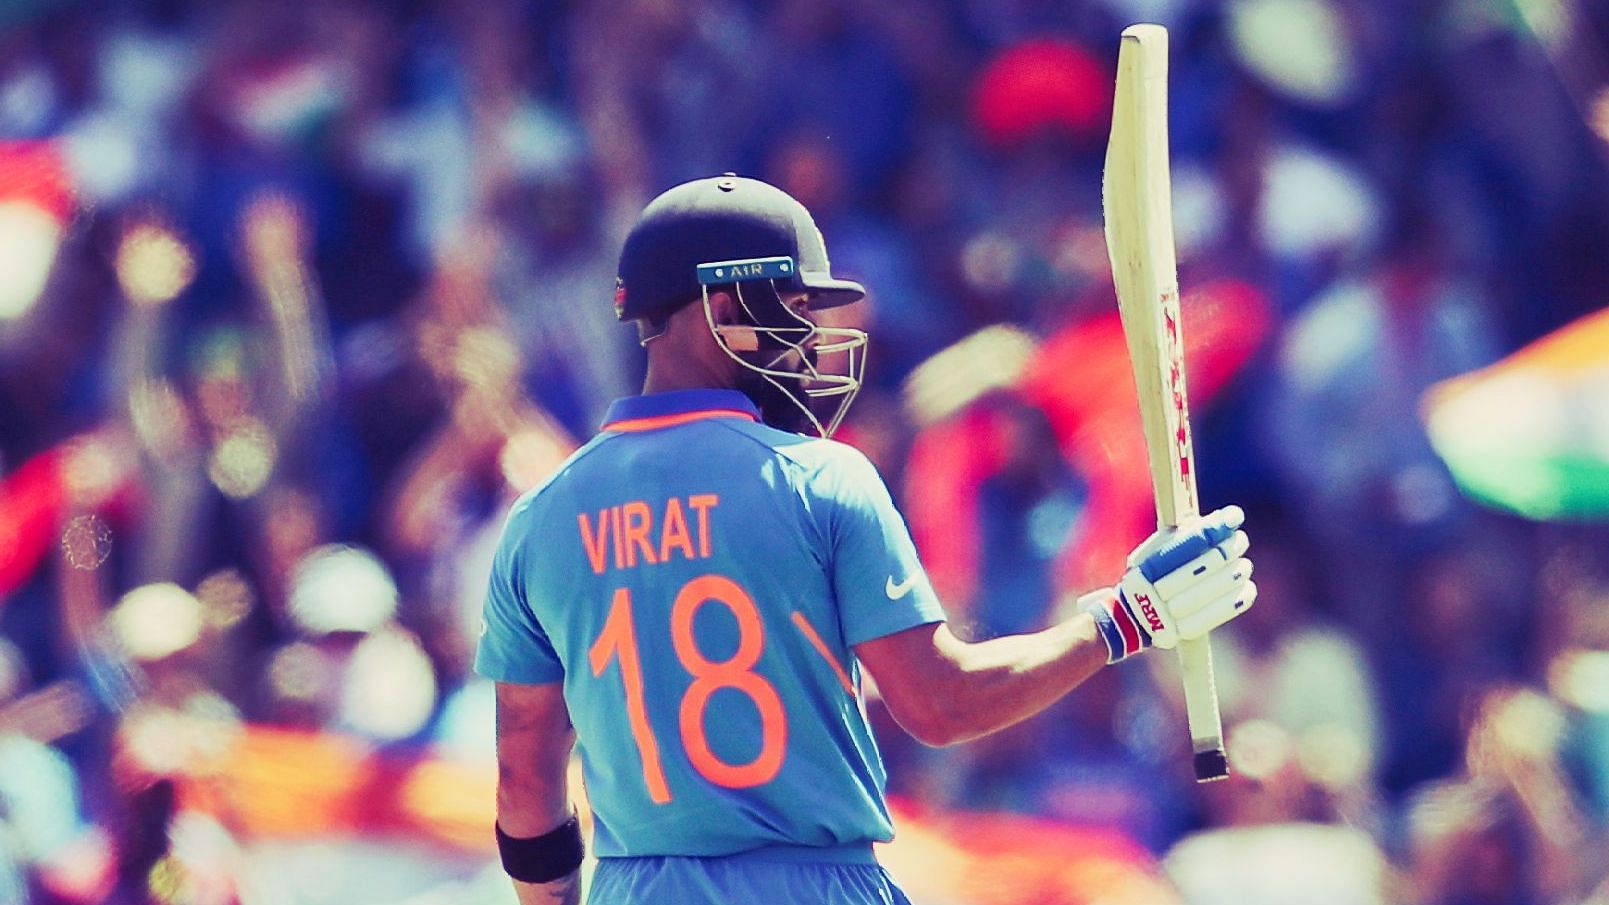 Virat Kohli scored his fourth consecutive fifty in the World Cup.